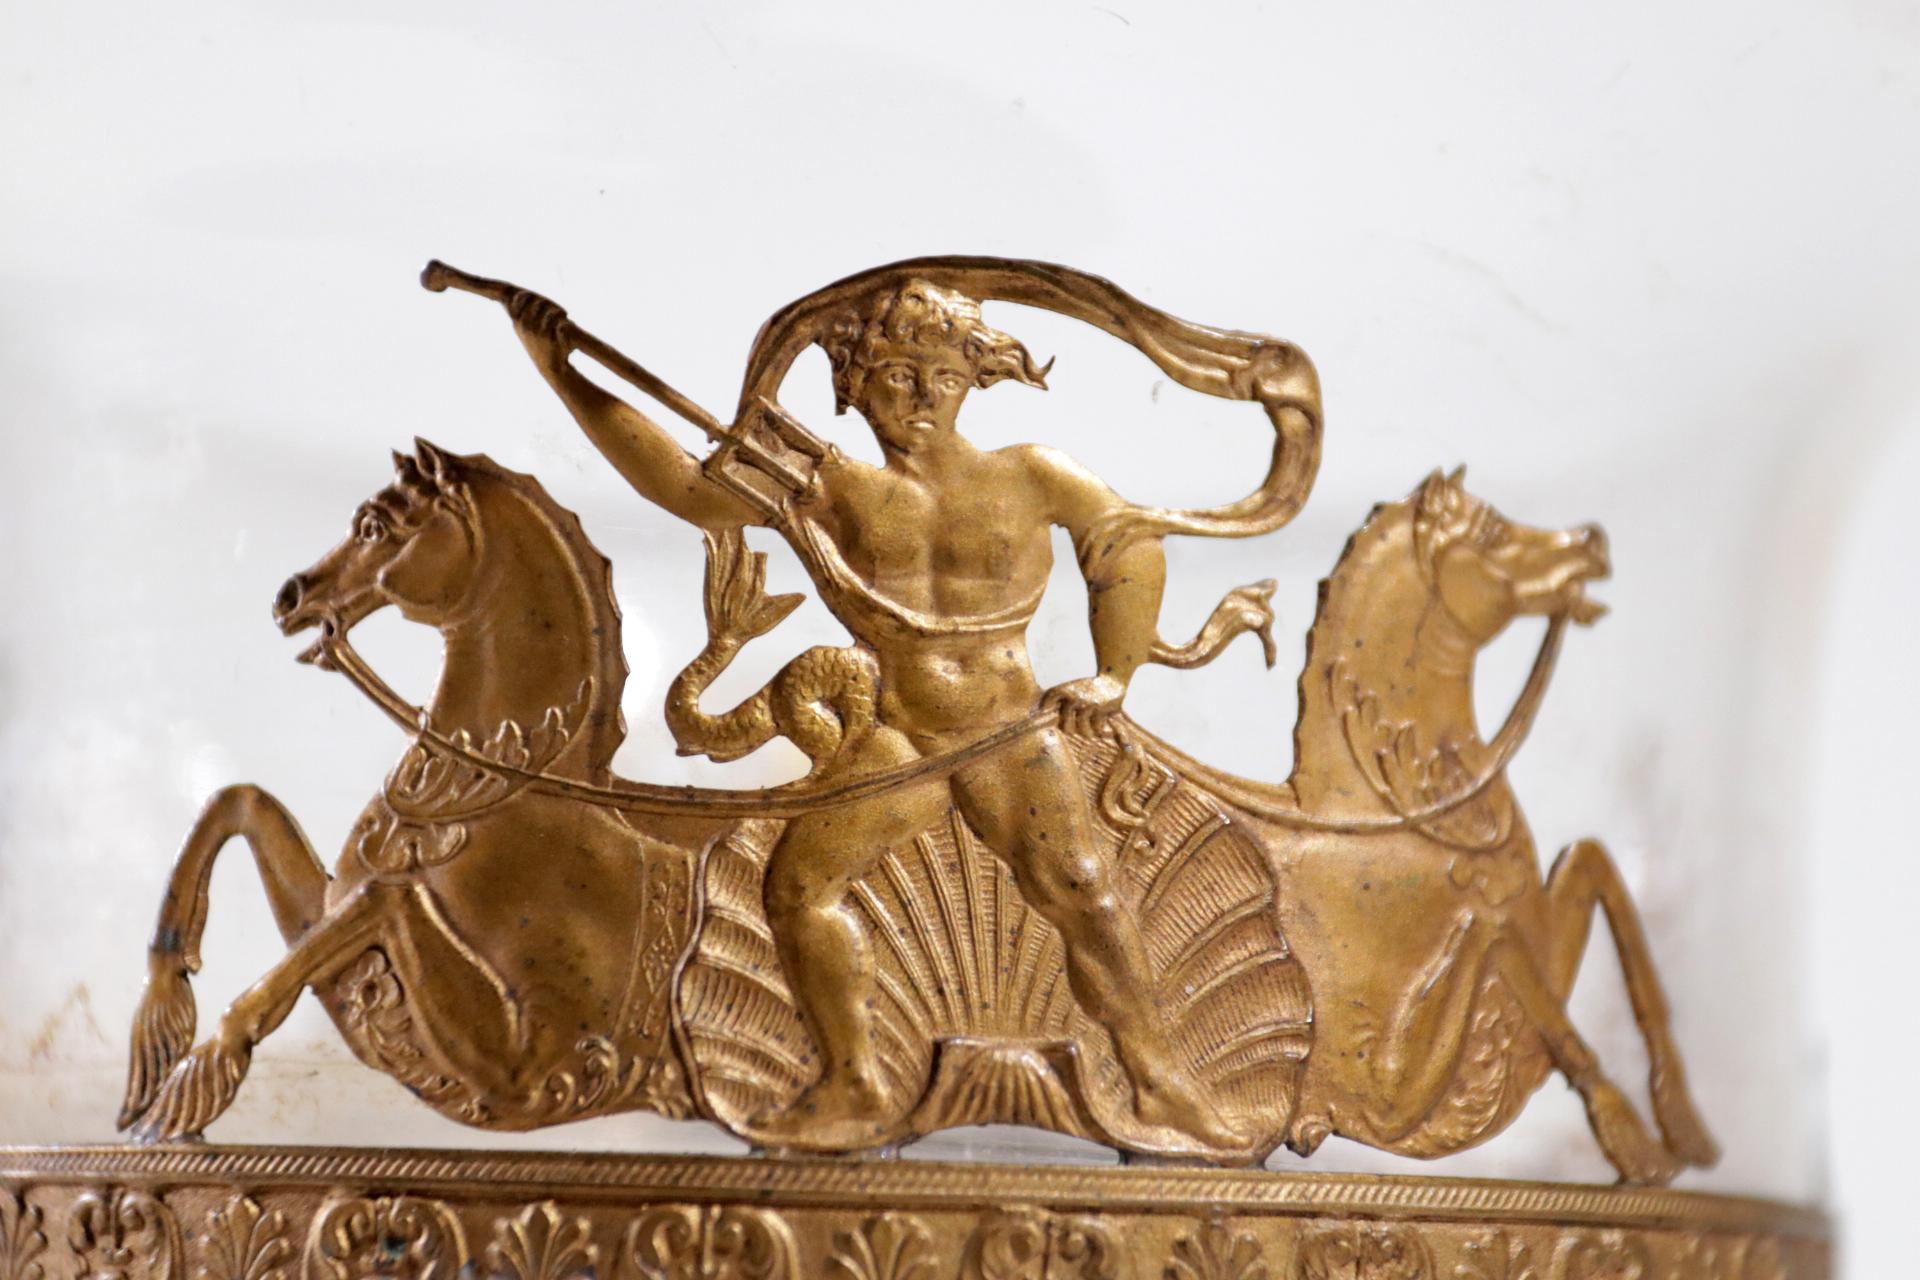 More than 200 years old showpiece for on the table. Made from glass, fire-gilt bronze and green veined marble. Beautiful horses with a warrior and mythological figures with harp and triangle around the glass bowl on columns. The glass is old and